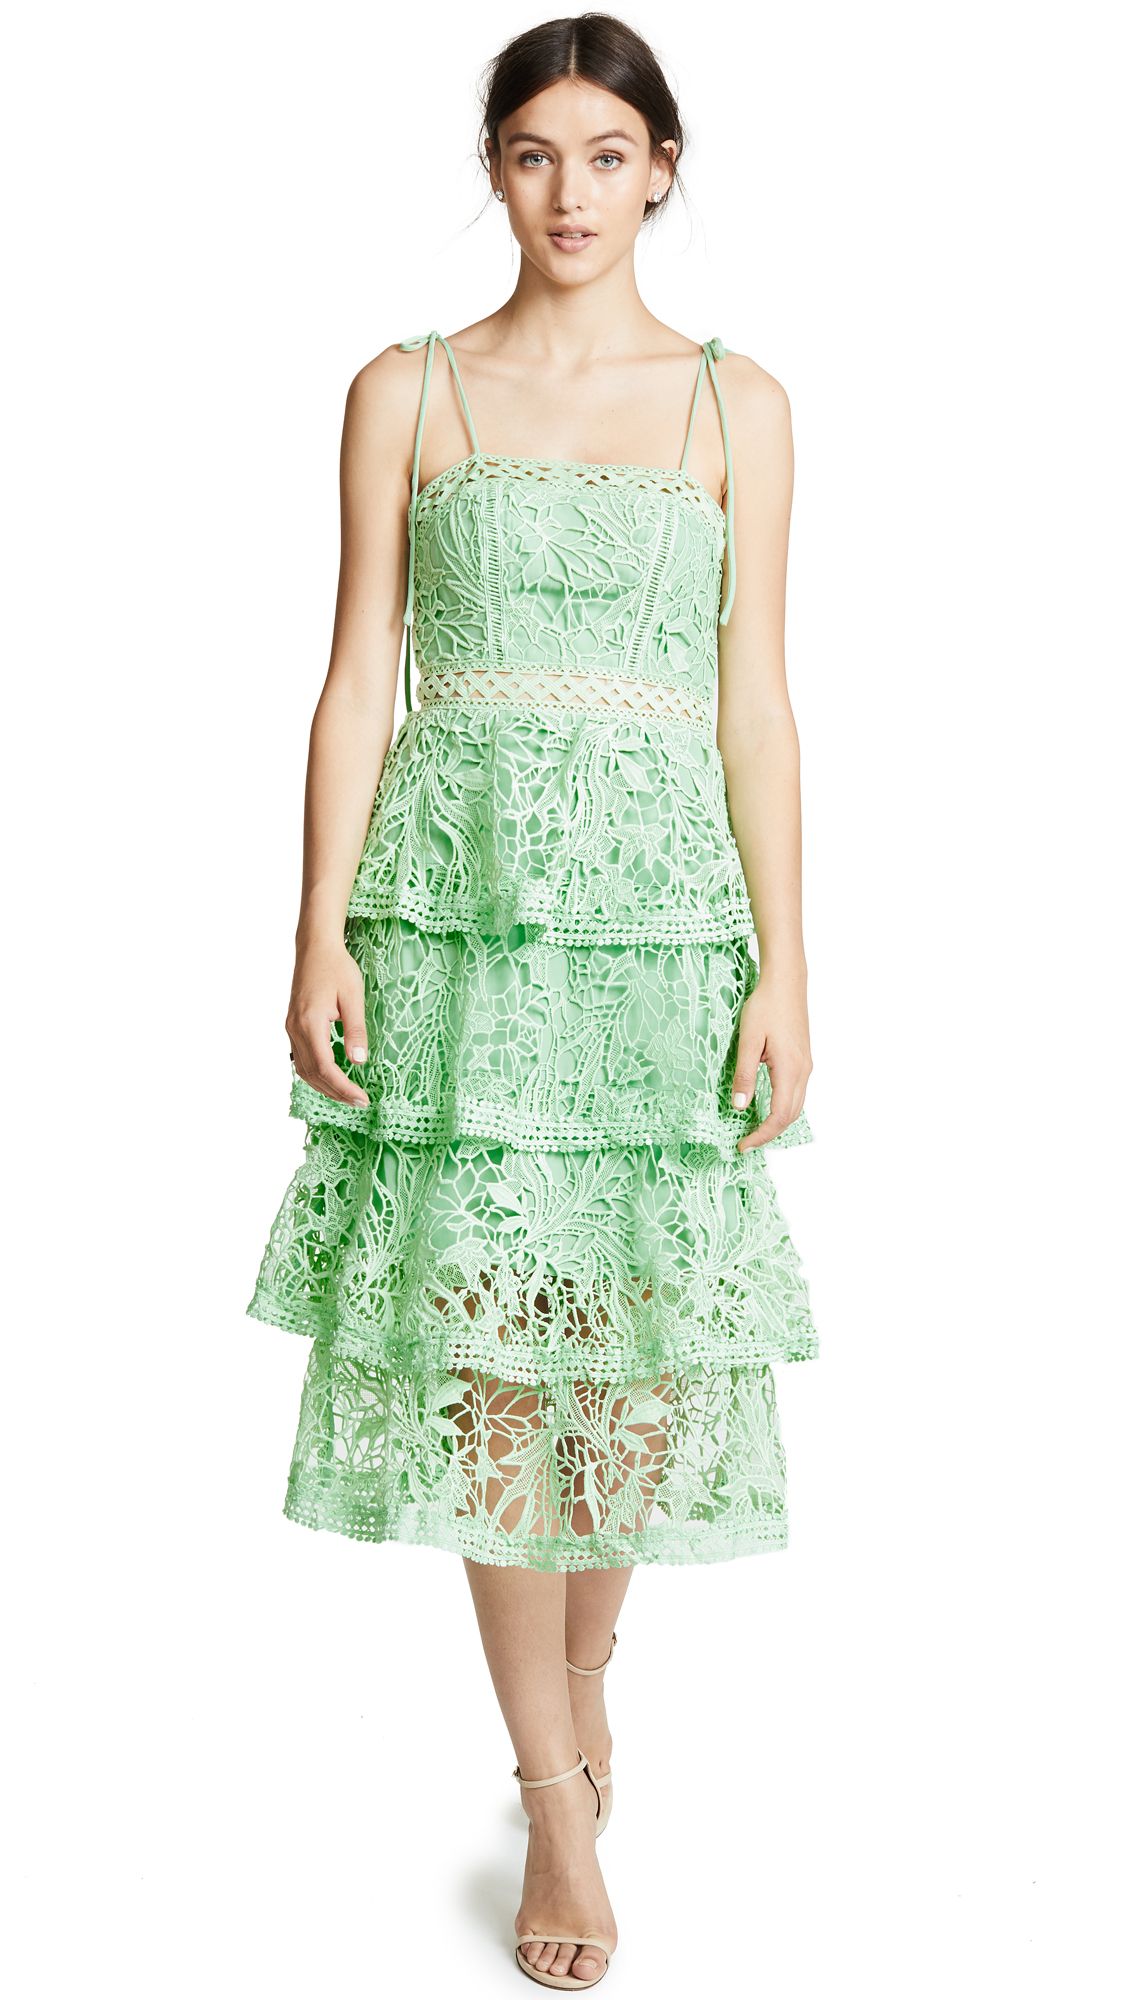 Glamorous True Decadence Dress with Tiered Lace | Shopbop